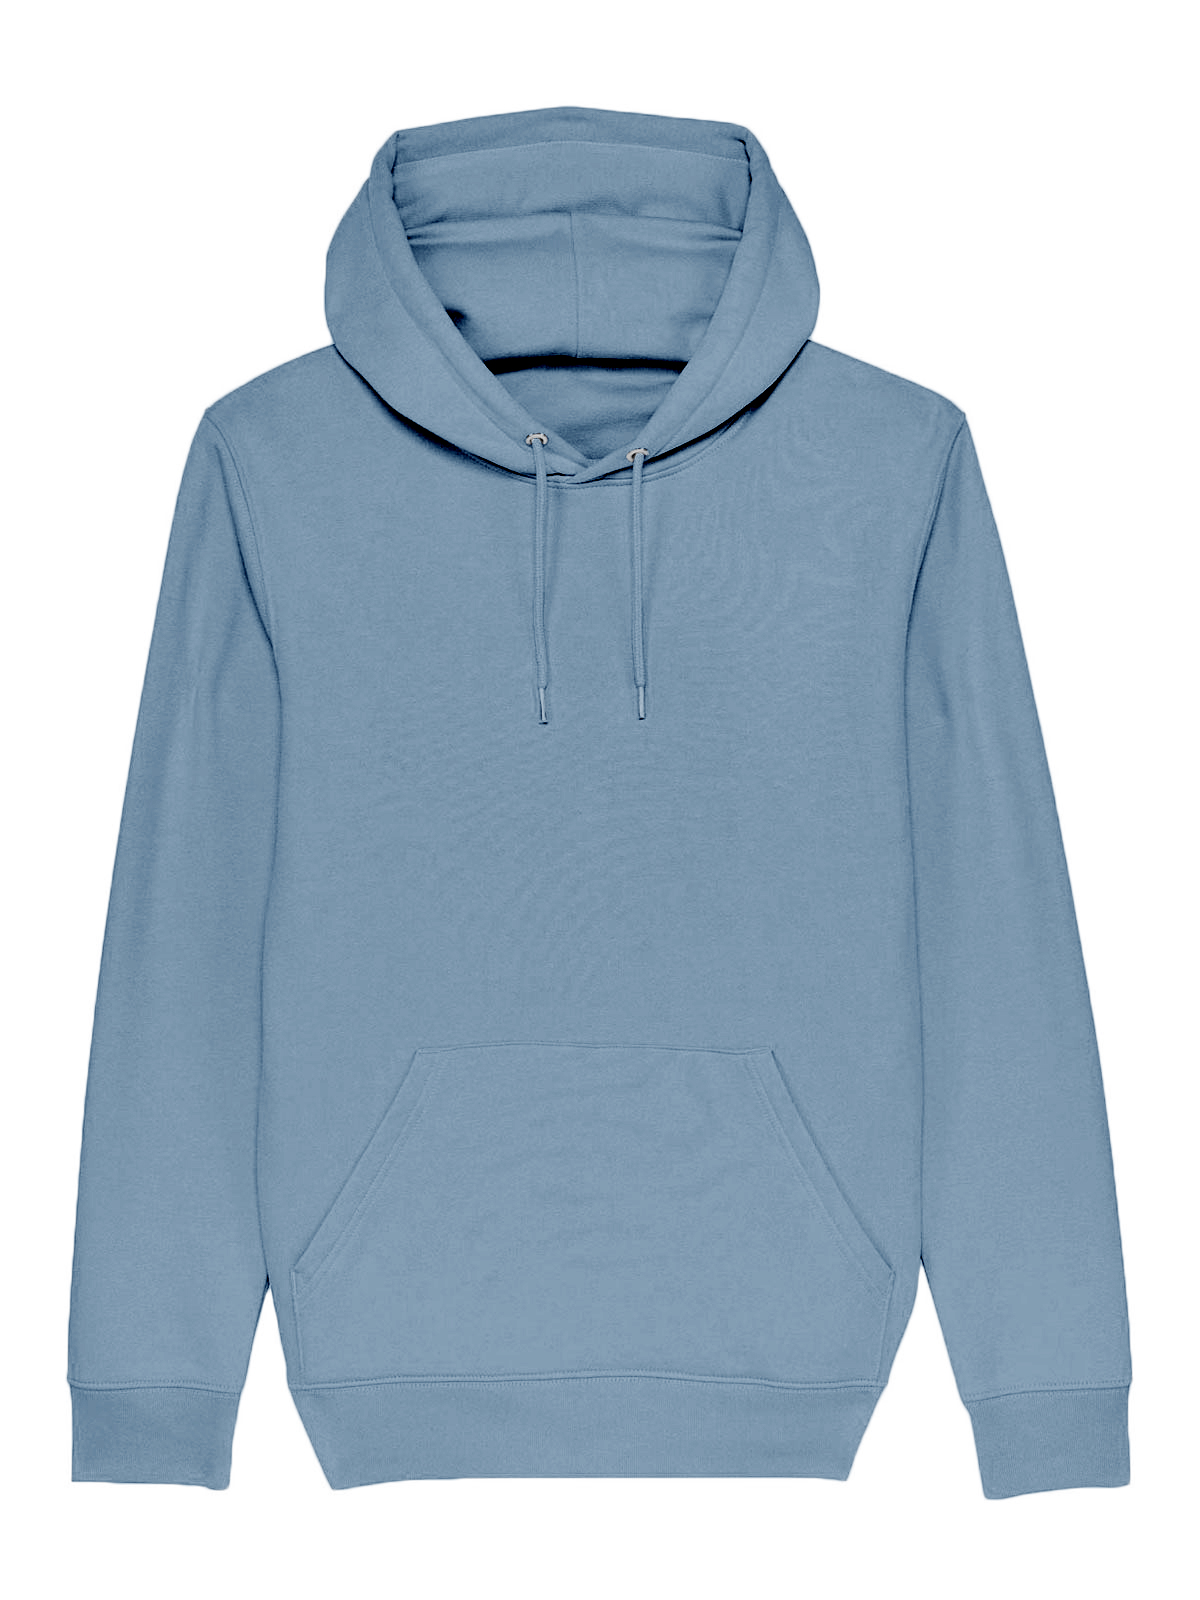 mens-terry-hooded-mineral-blue.webp